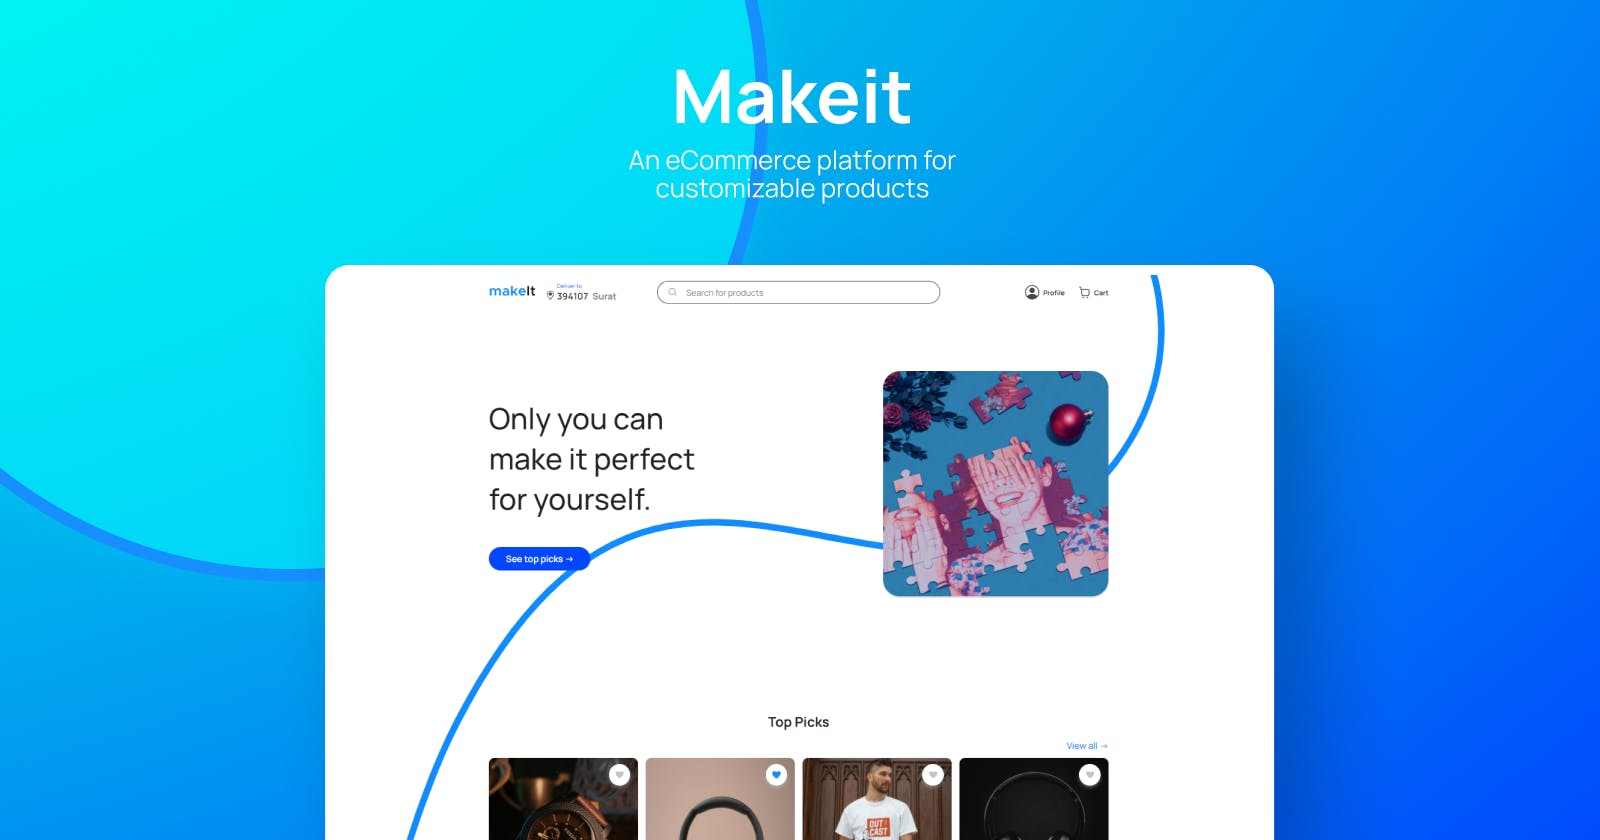 Introducing MakeIt- An eCommerce platform for customizable products